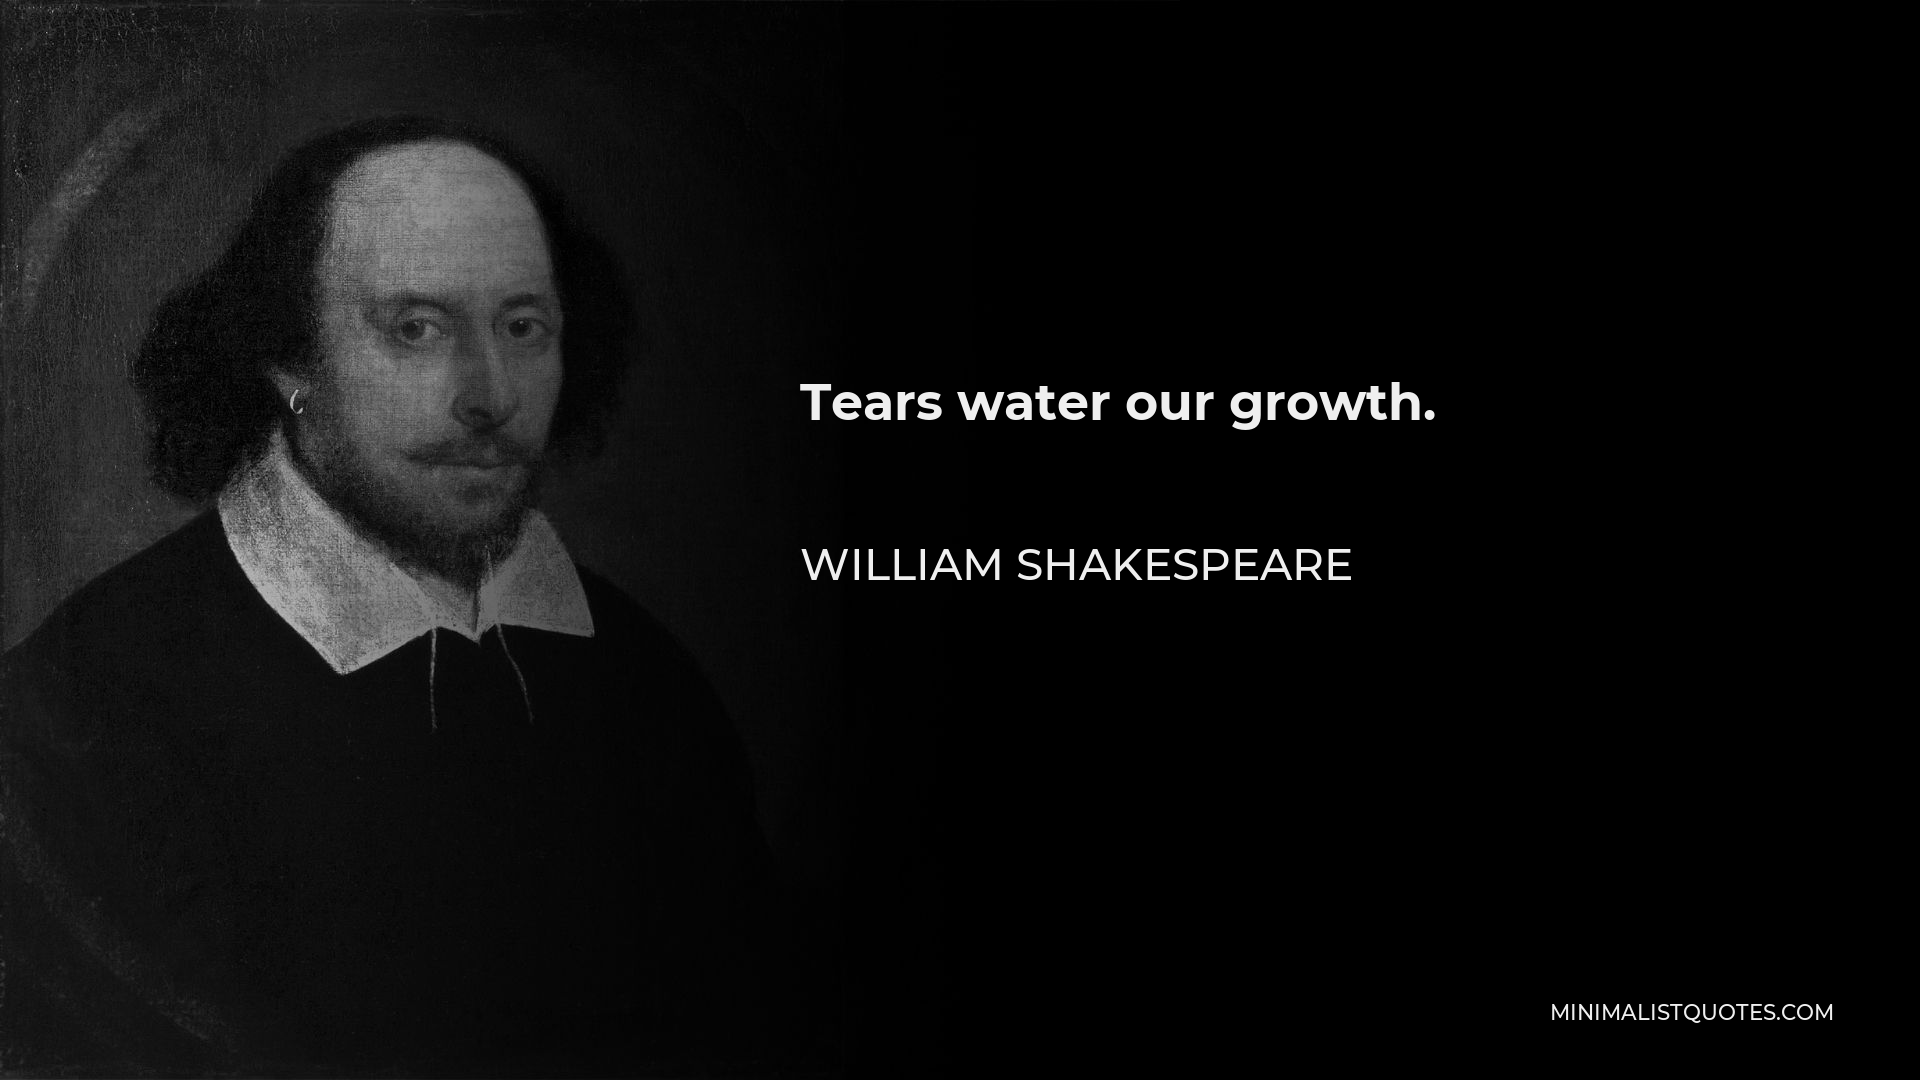 William Shakespeare Quote - Tears water our growth.